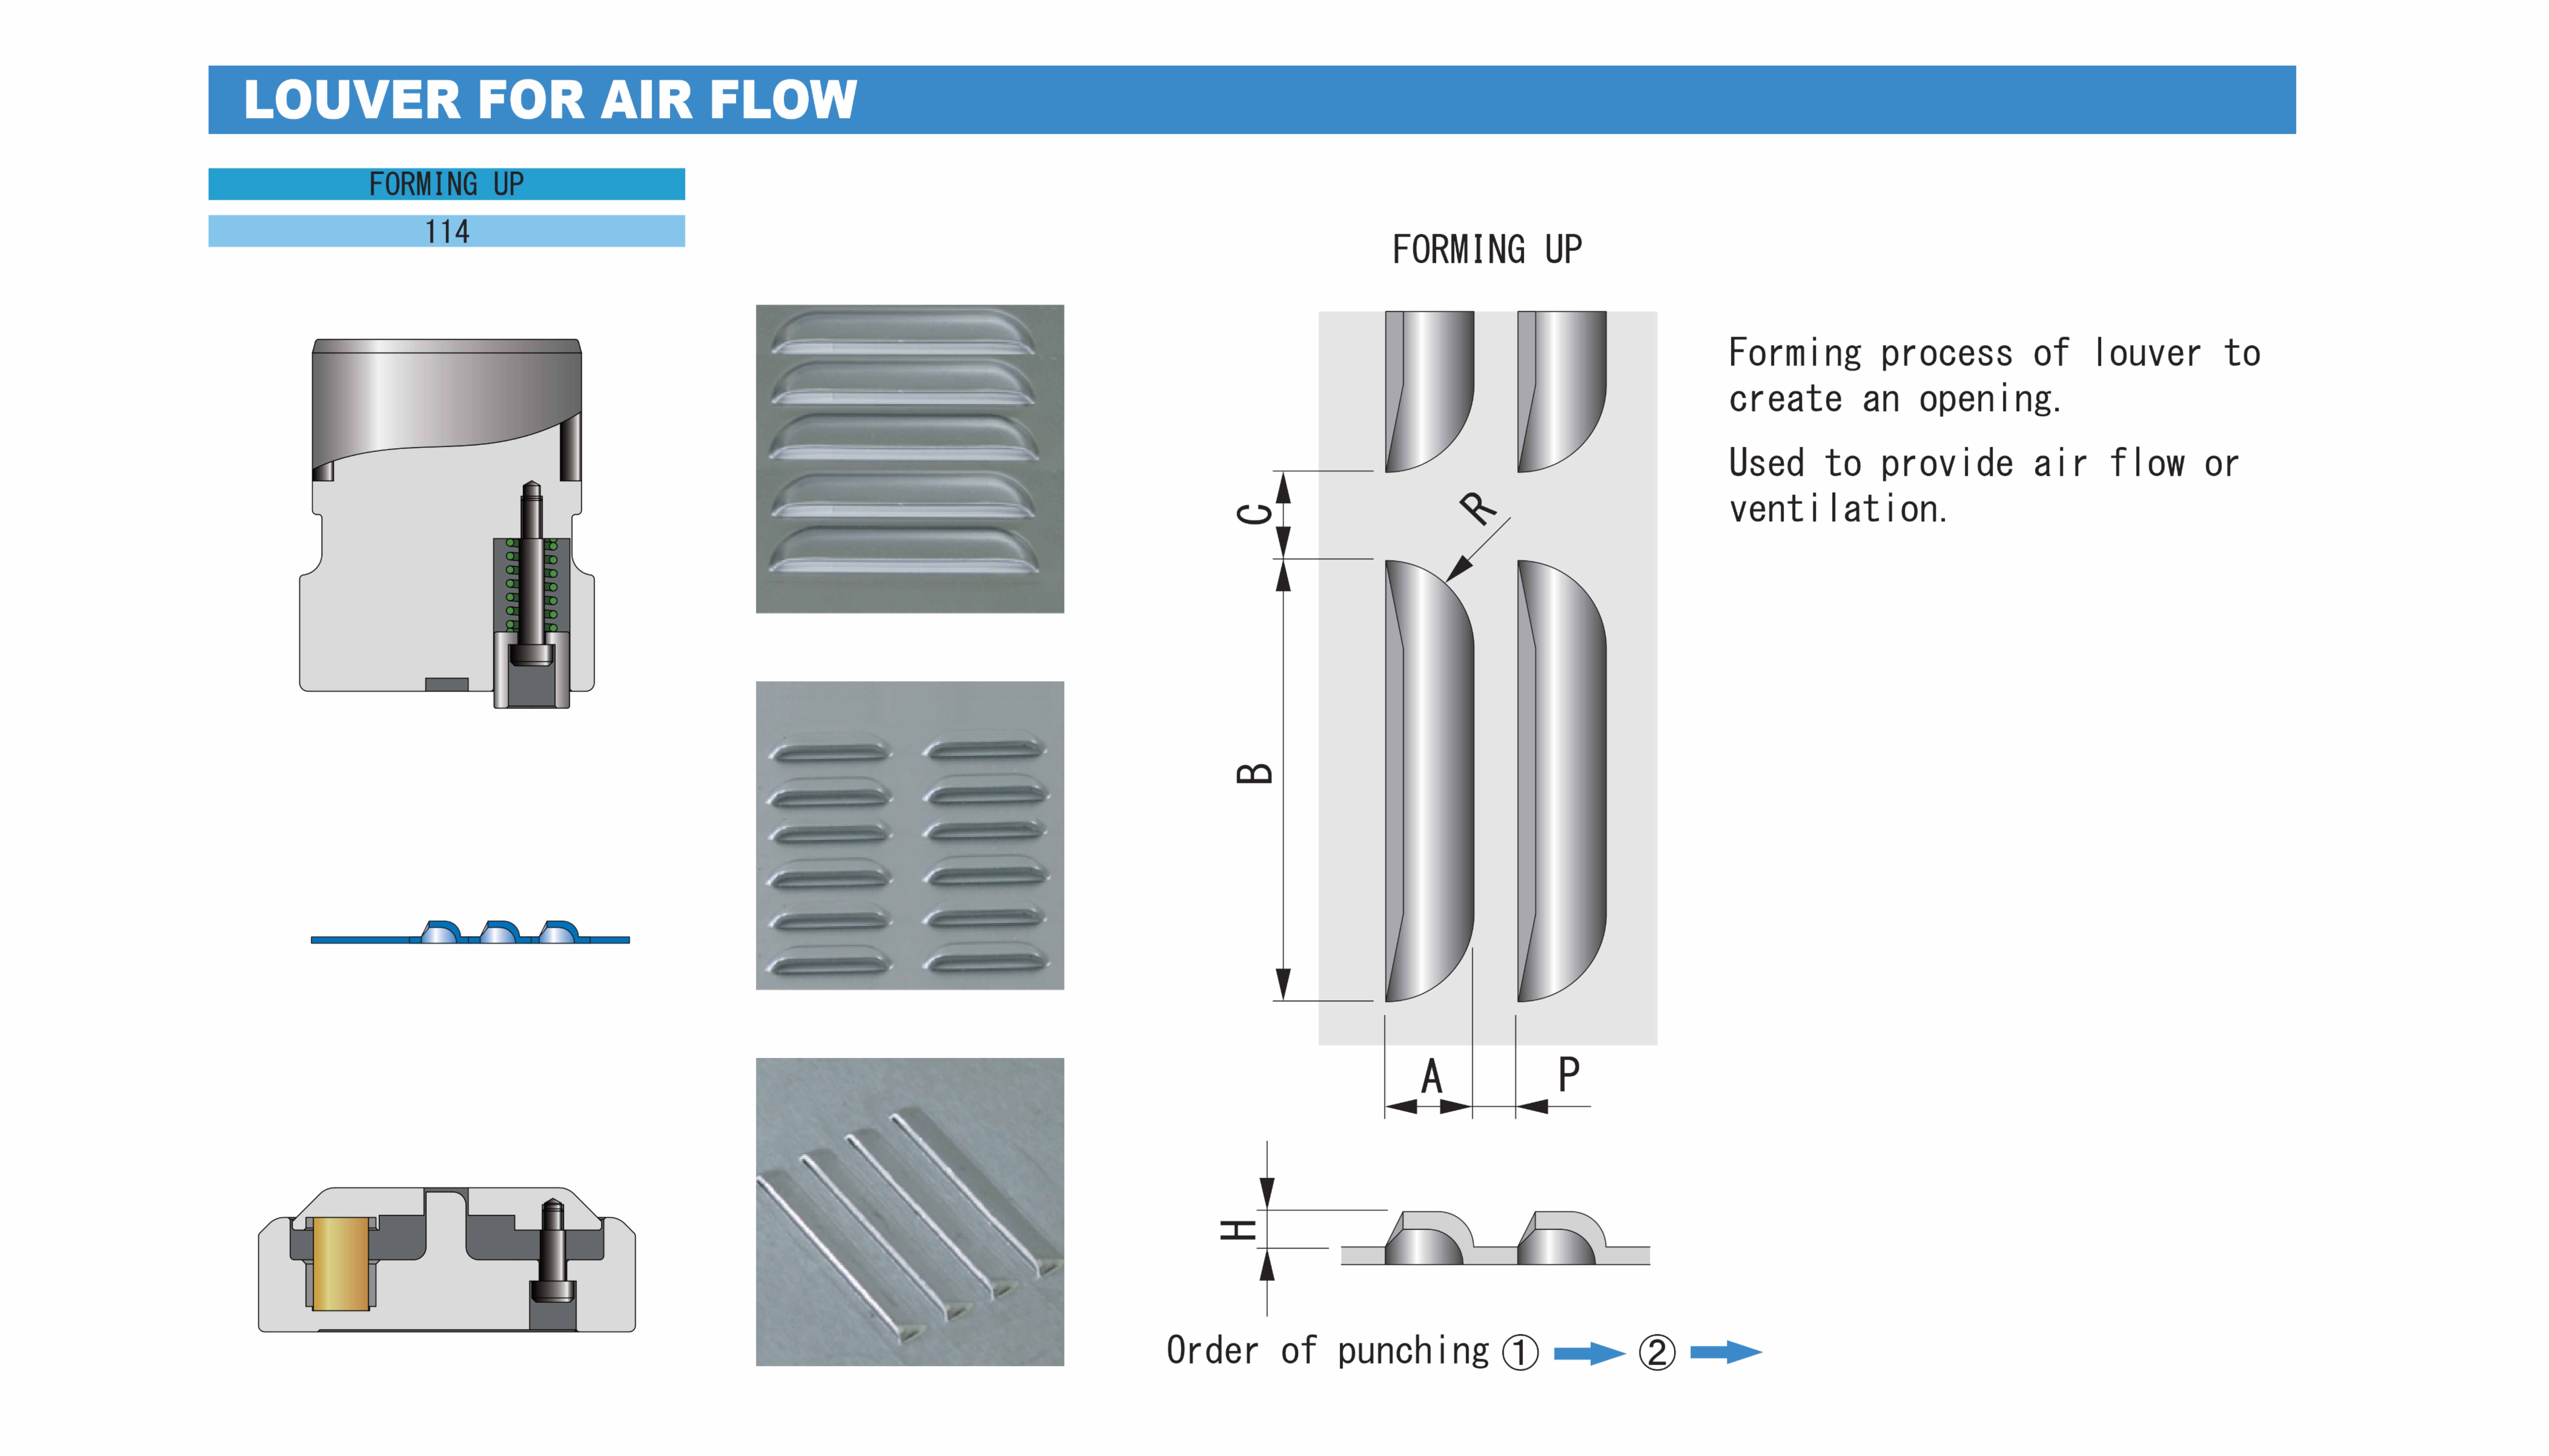 CONIC-FORMING-LOUVER-AIR-FLOW-MURATA